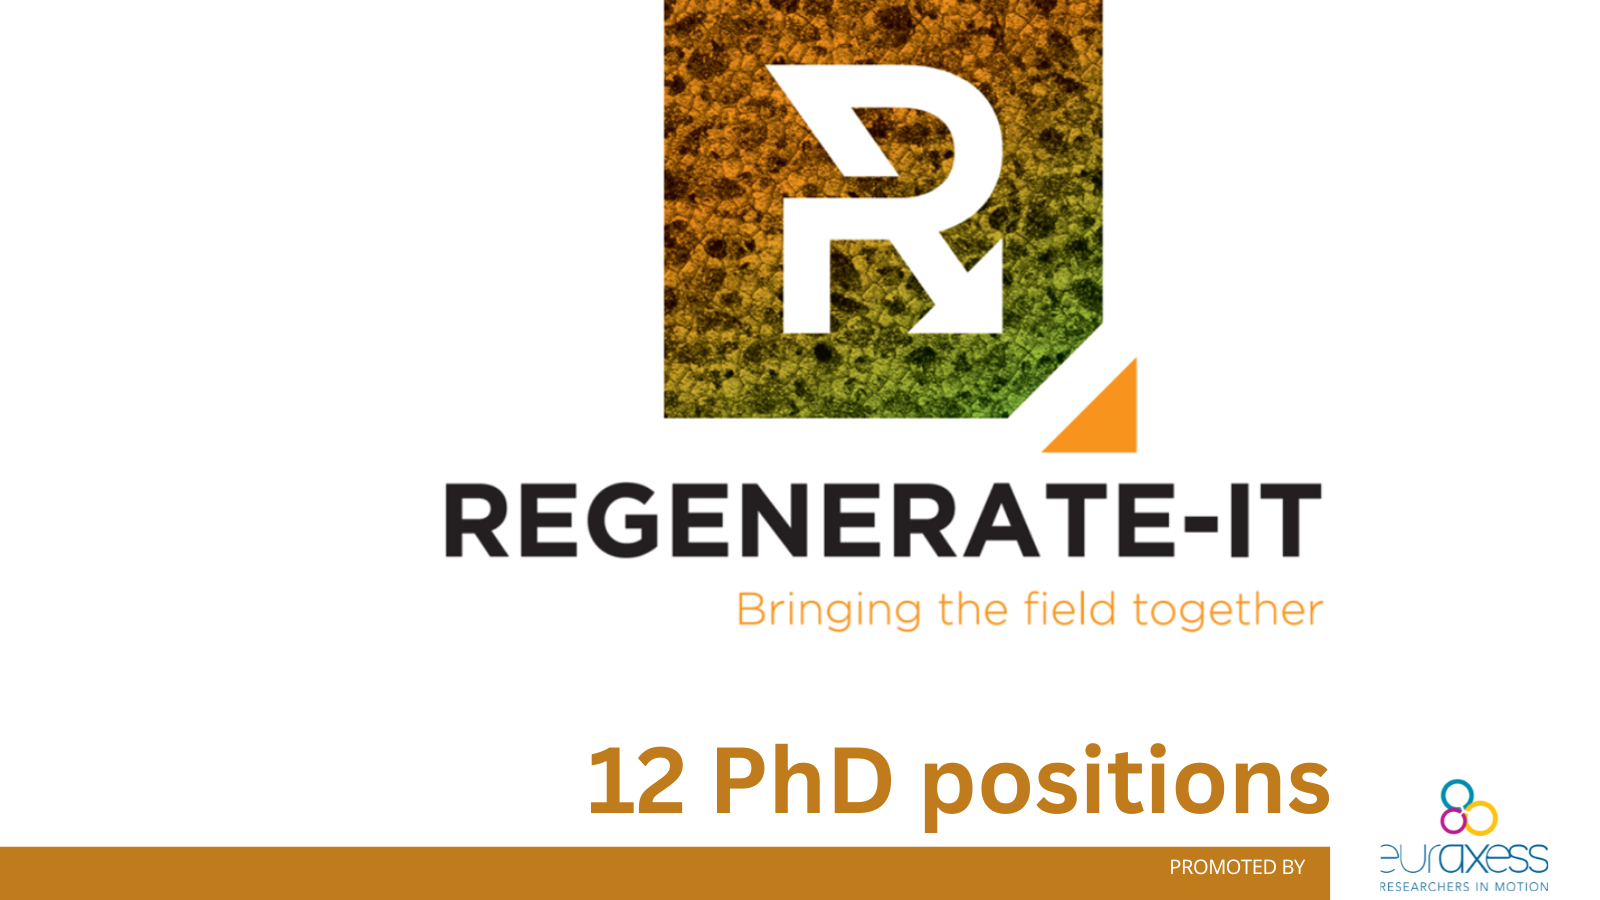 biology phd positions europe